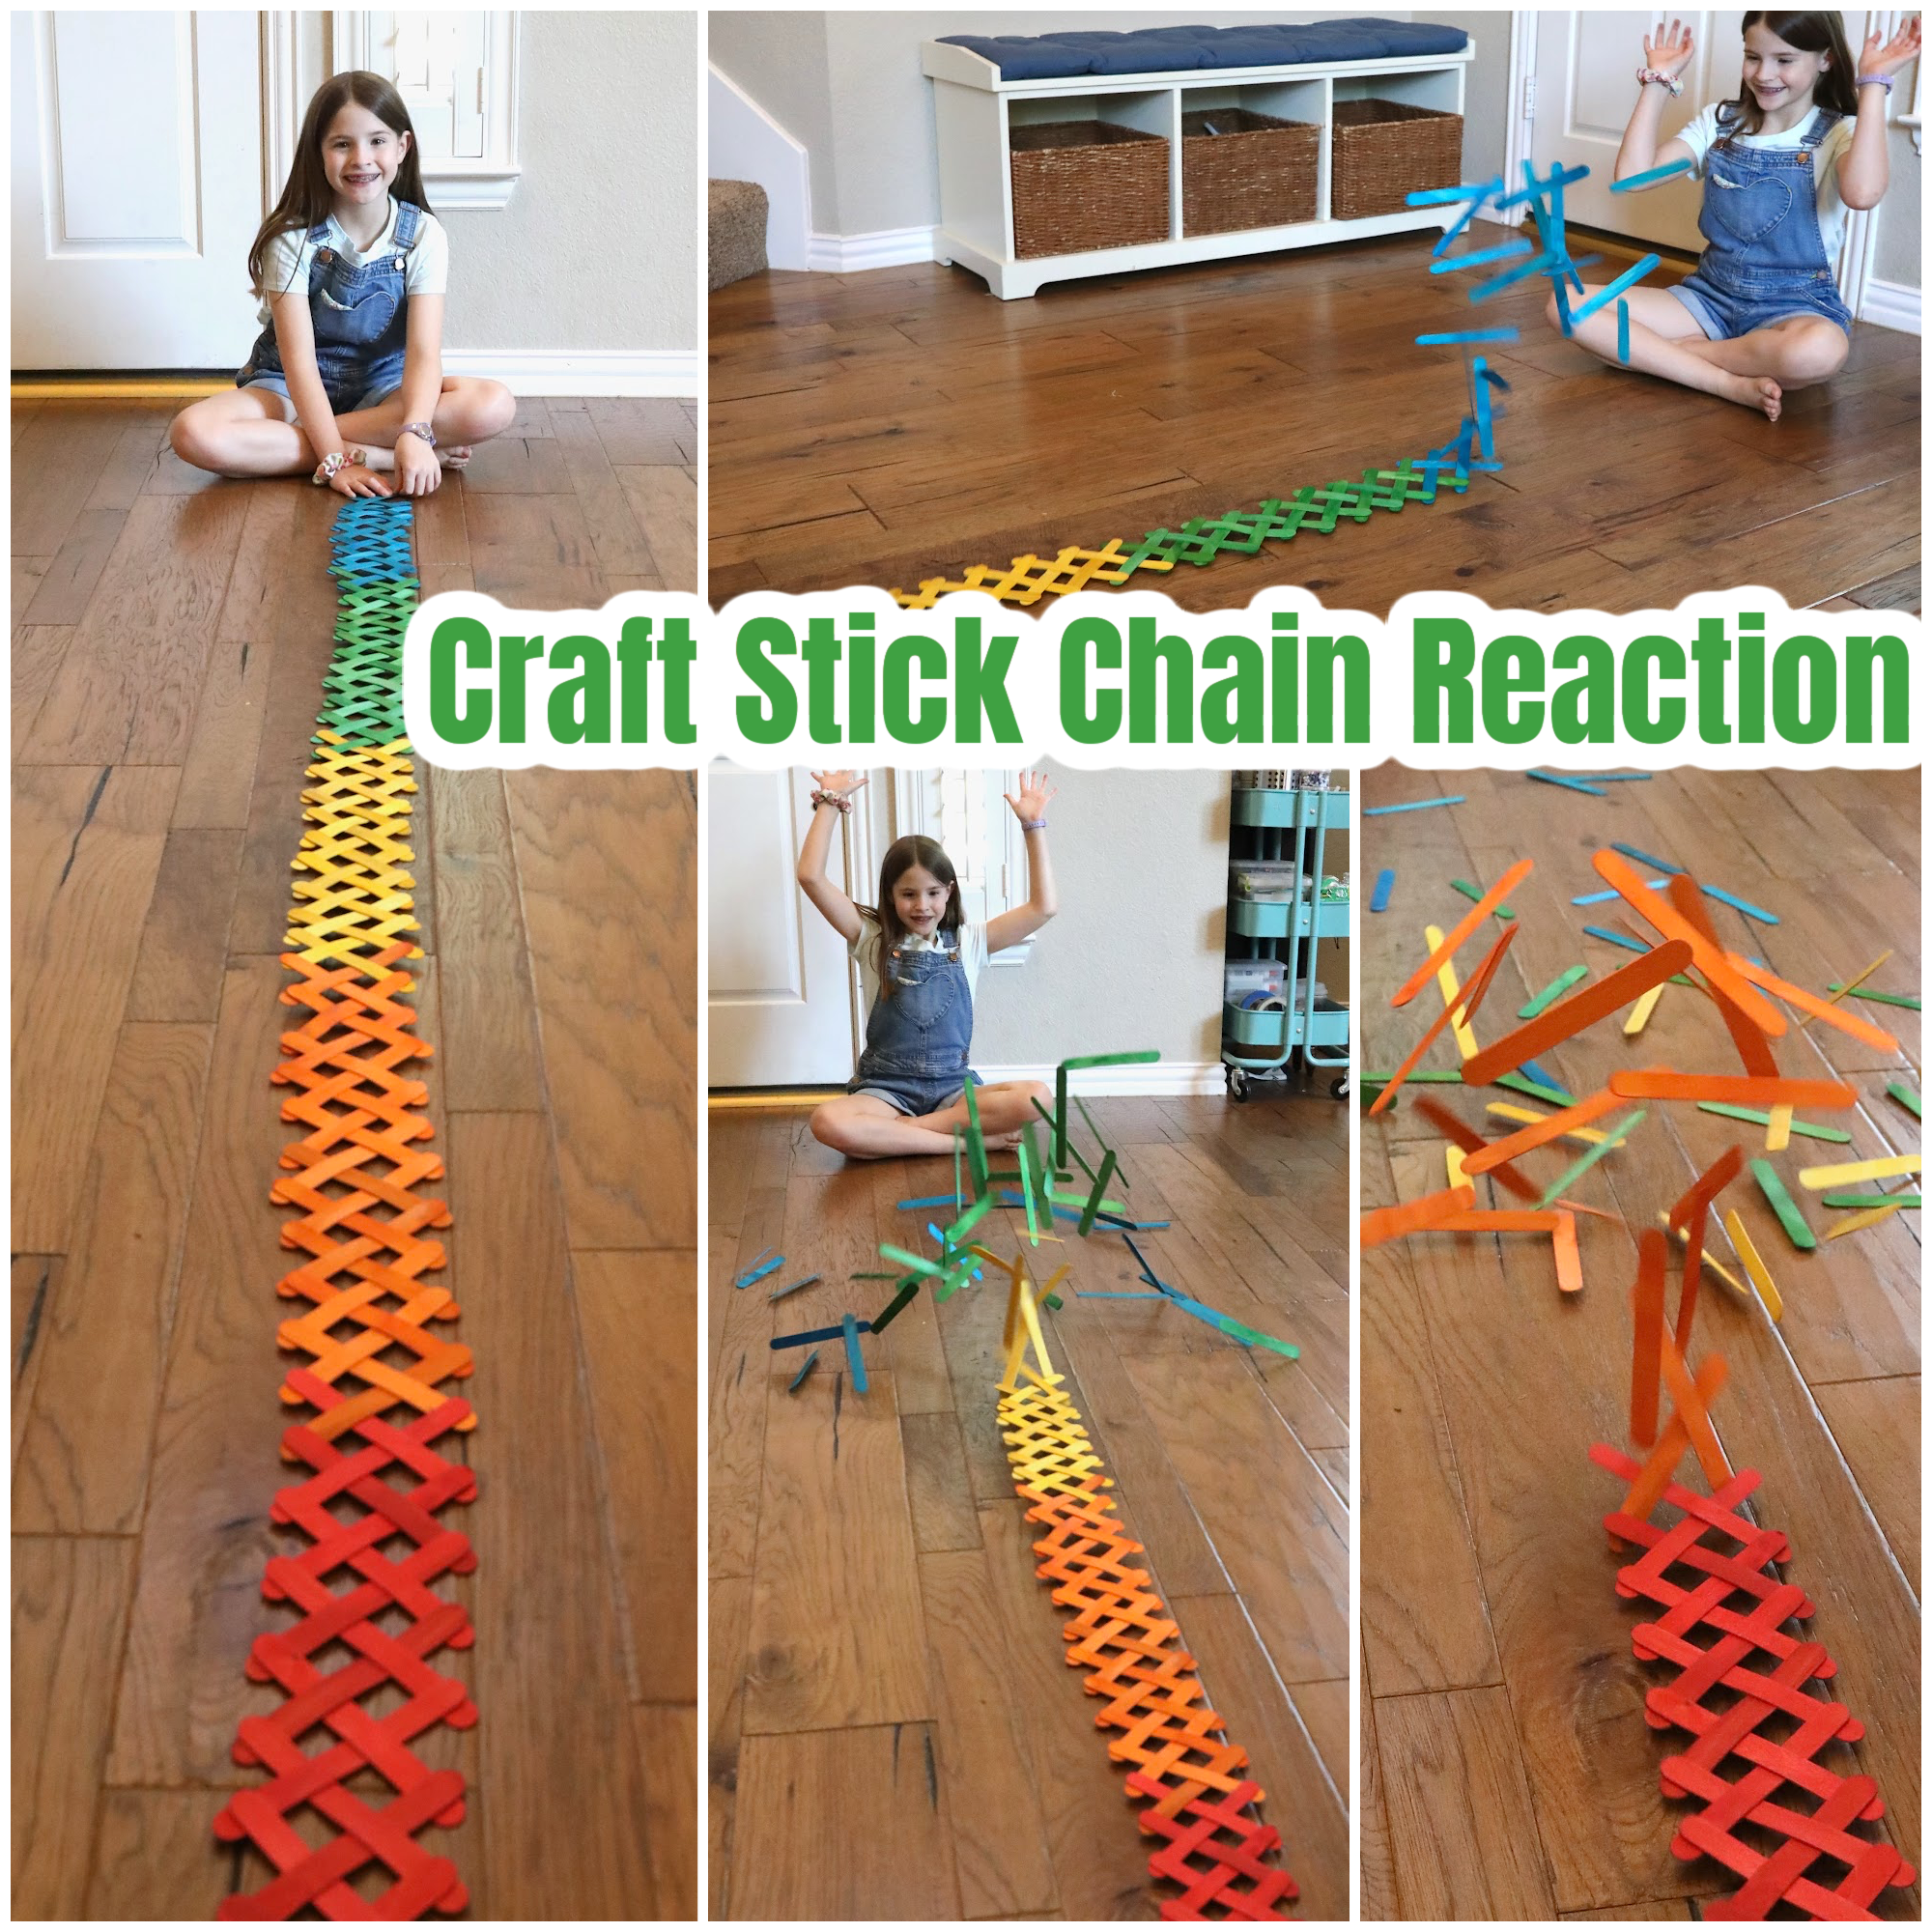 Build a Craft Stick Chain Reaction! - Frugal Fun For Boys and Girls